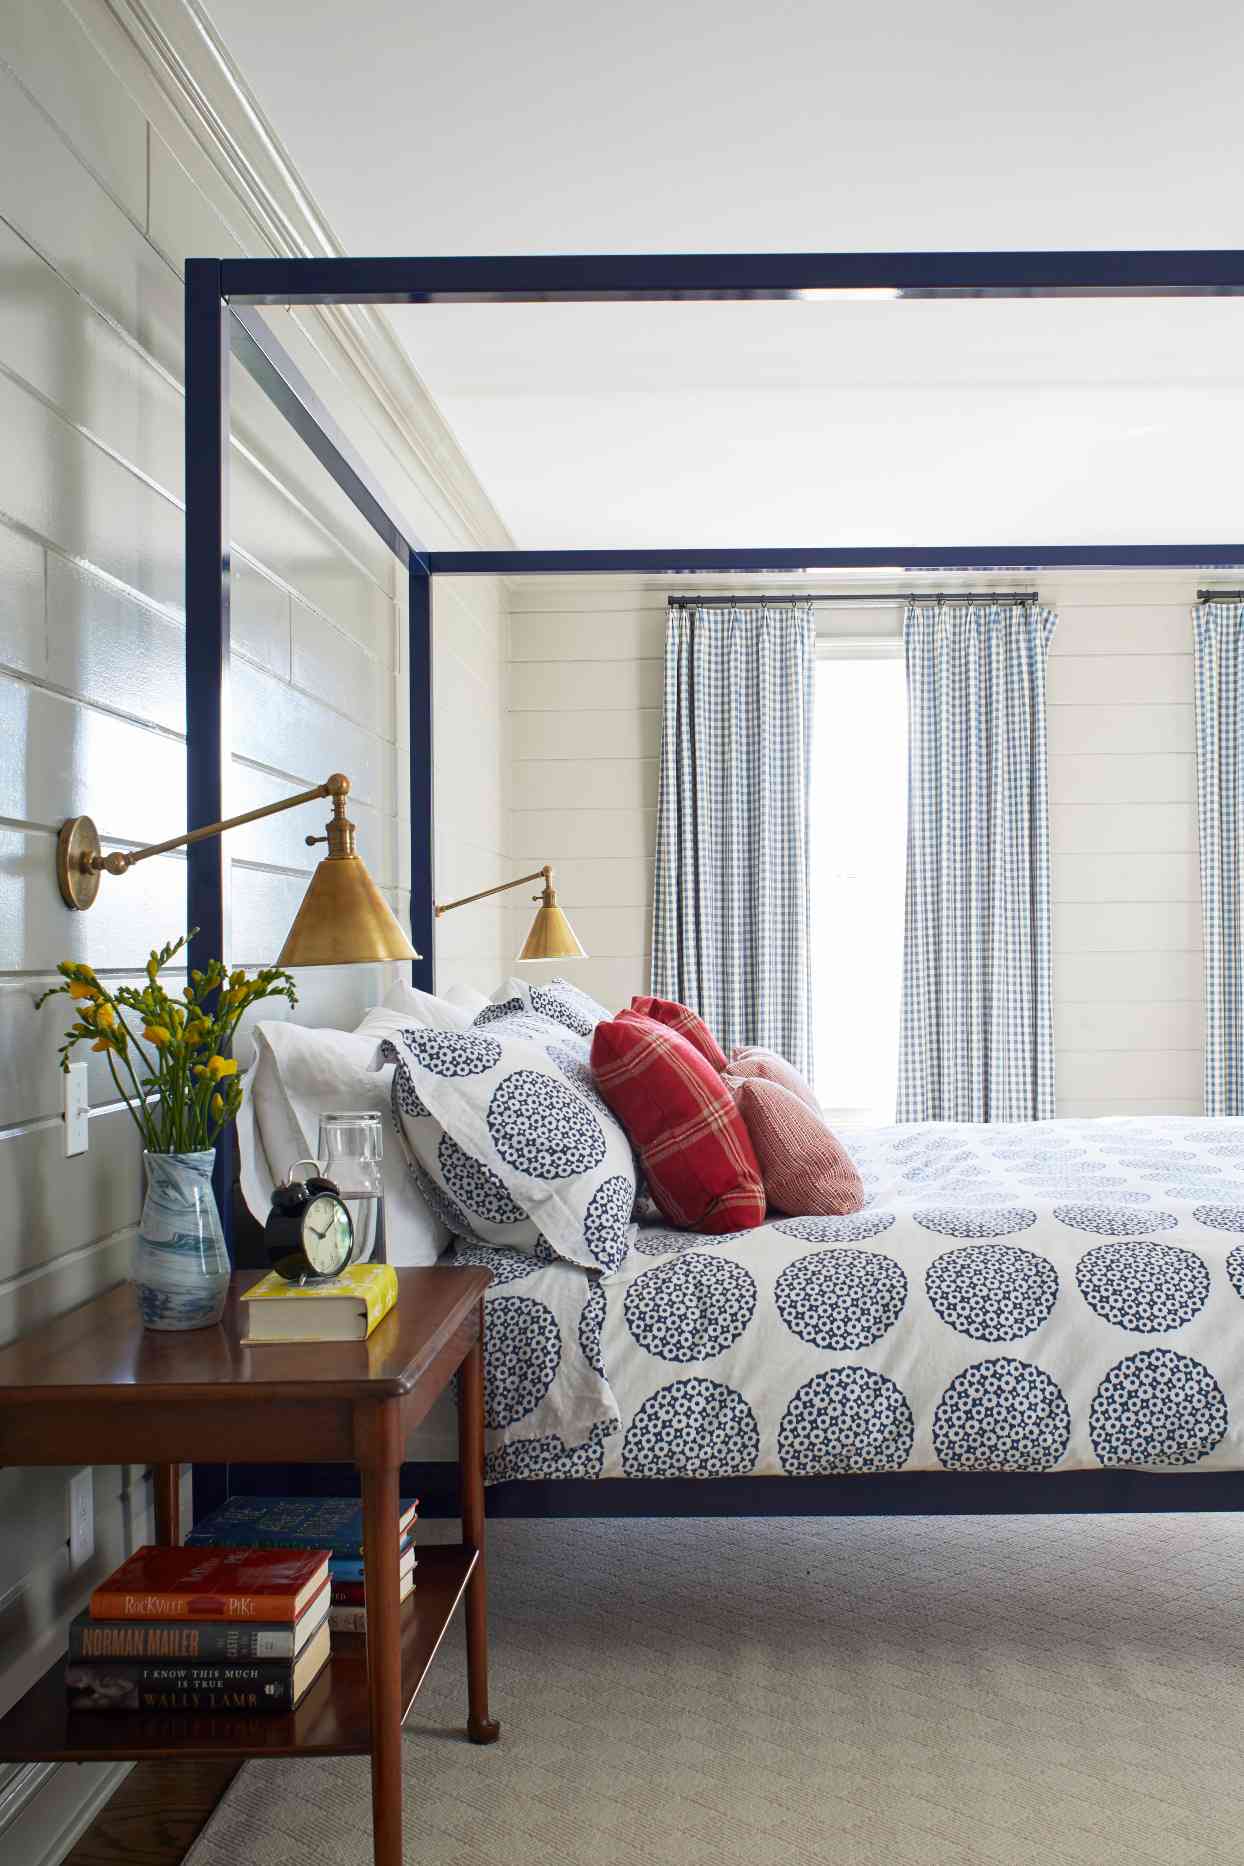 20 Brilliant Bedroom Color Schemes to Inspire Your Space   Better ...